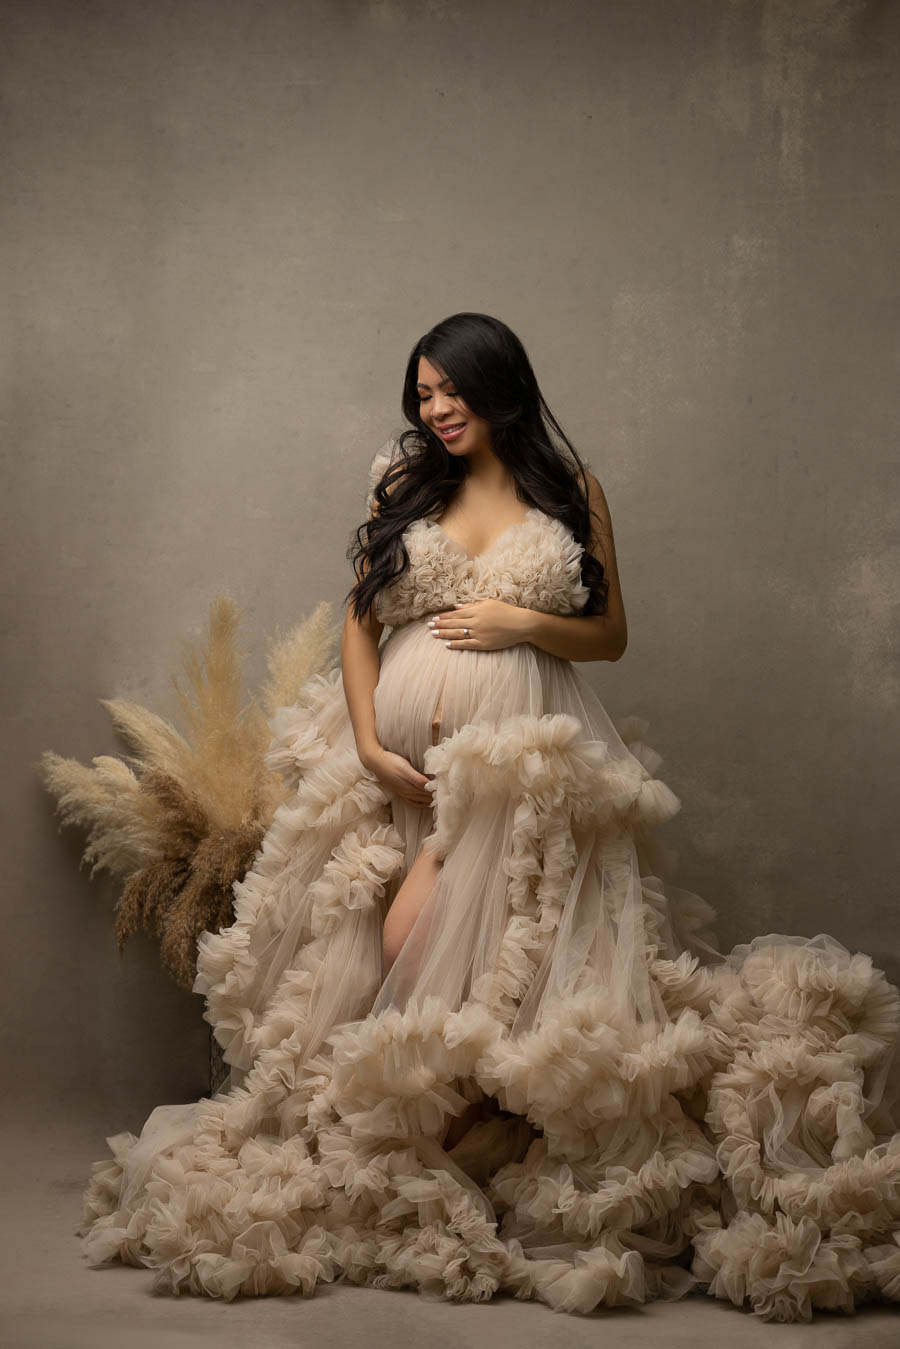 Maternity Photo Inspirations (31 Pictures) - Page 2 of 3 - Style O Trend  680888037393626…